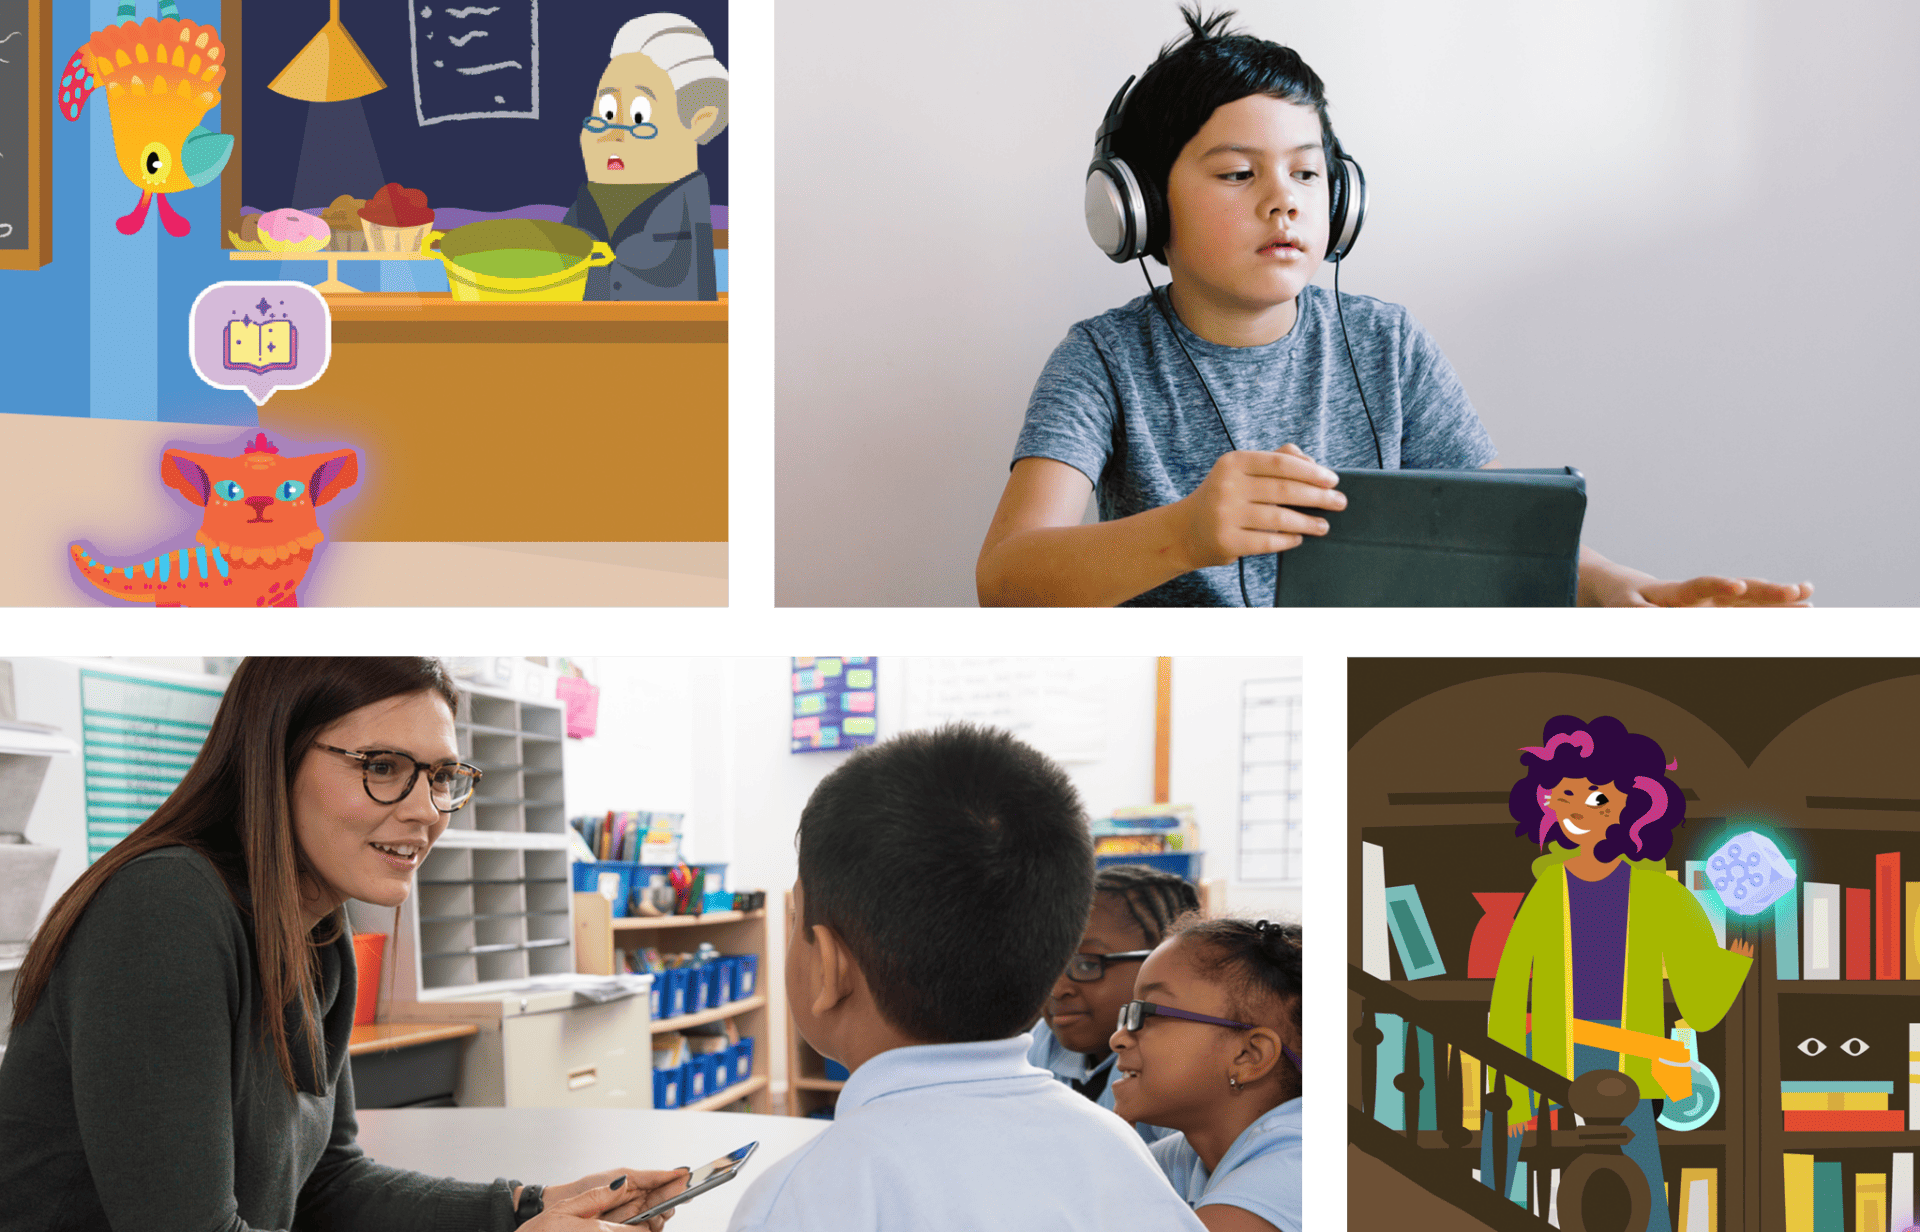 Collage of four educational scenes: animated language learning app, boy using tablet with headphones, teacher discussing with students, and animated character with books.